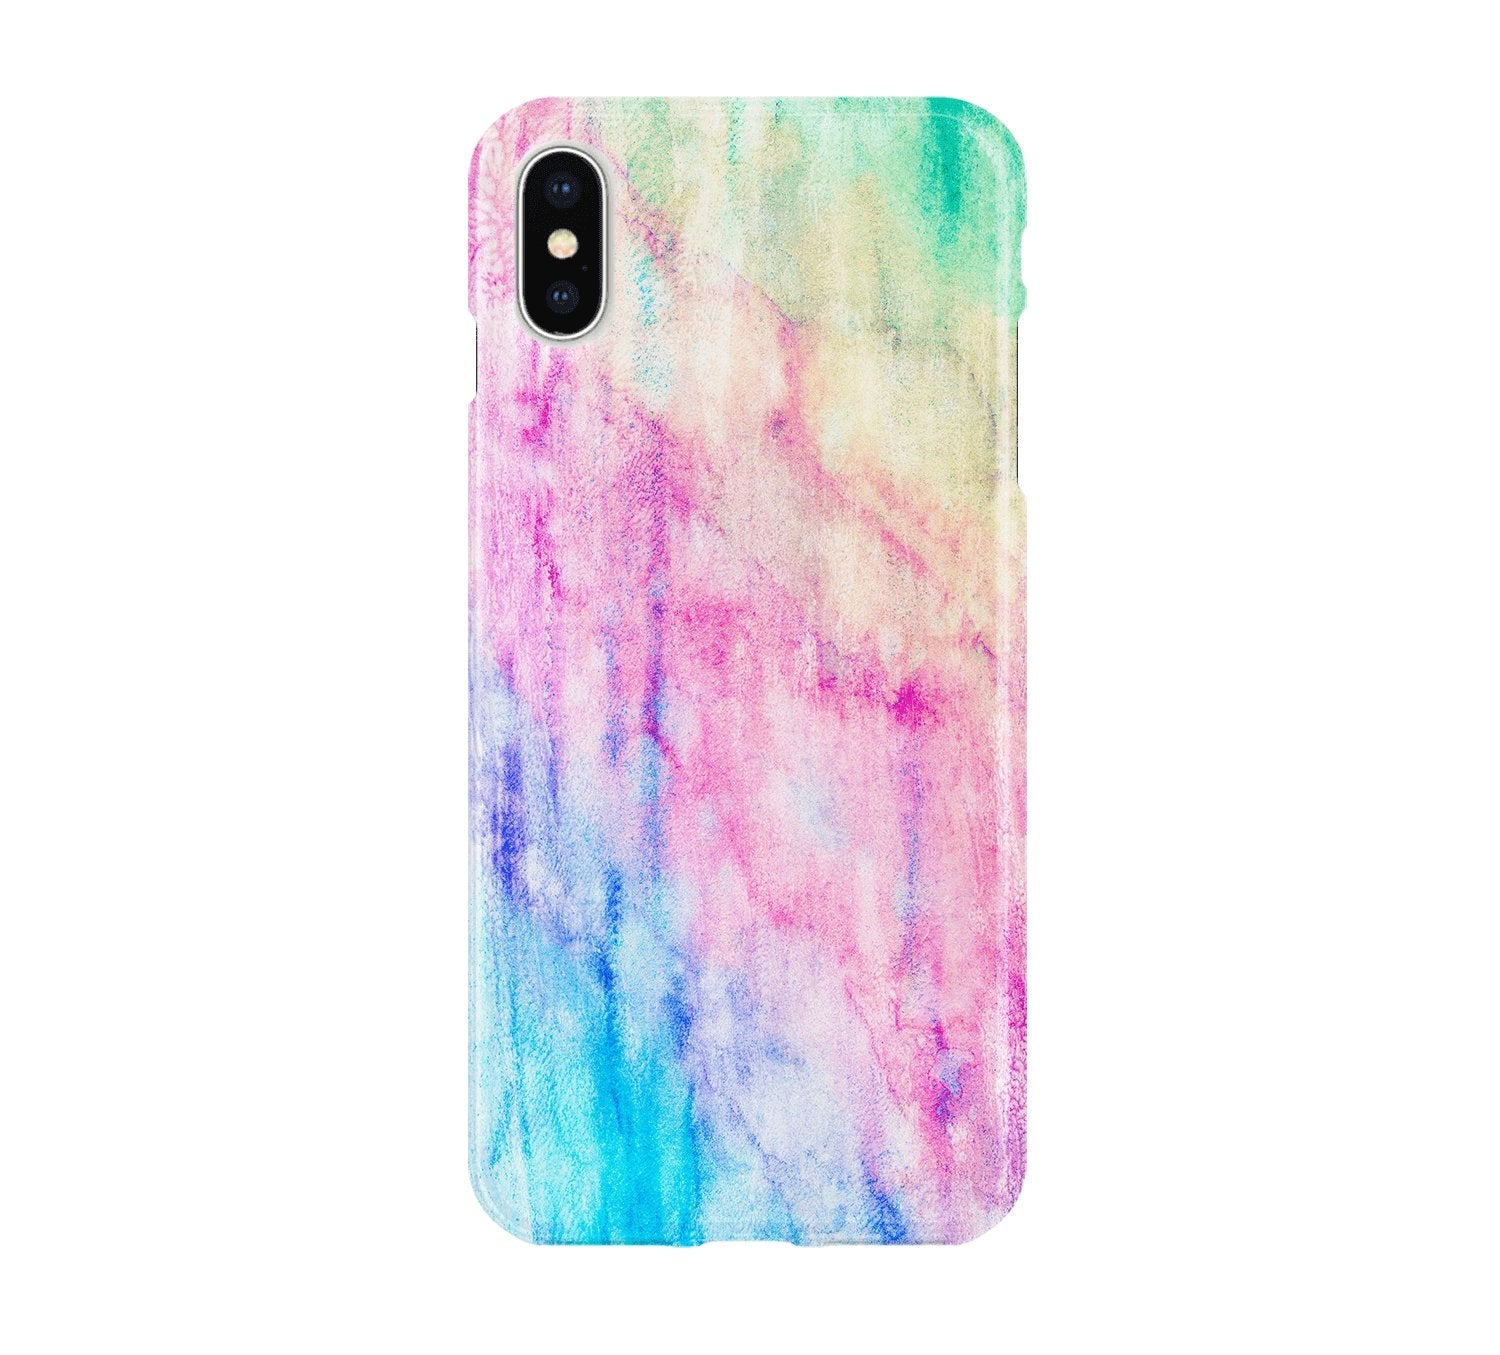 Fading Rainbow - iPhone phone case designs by CaseSwagger